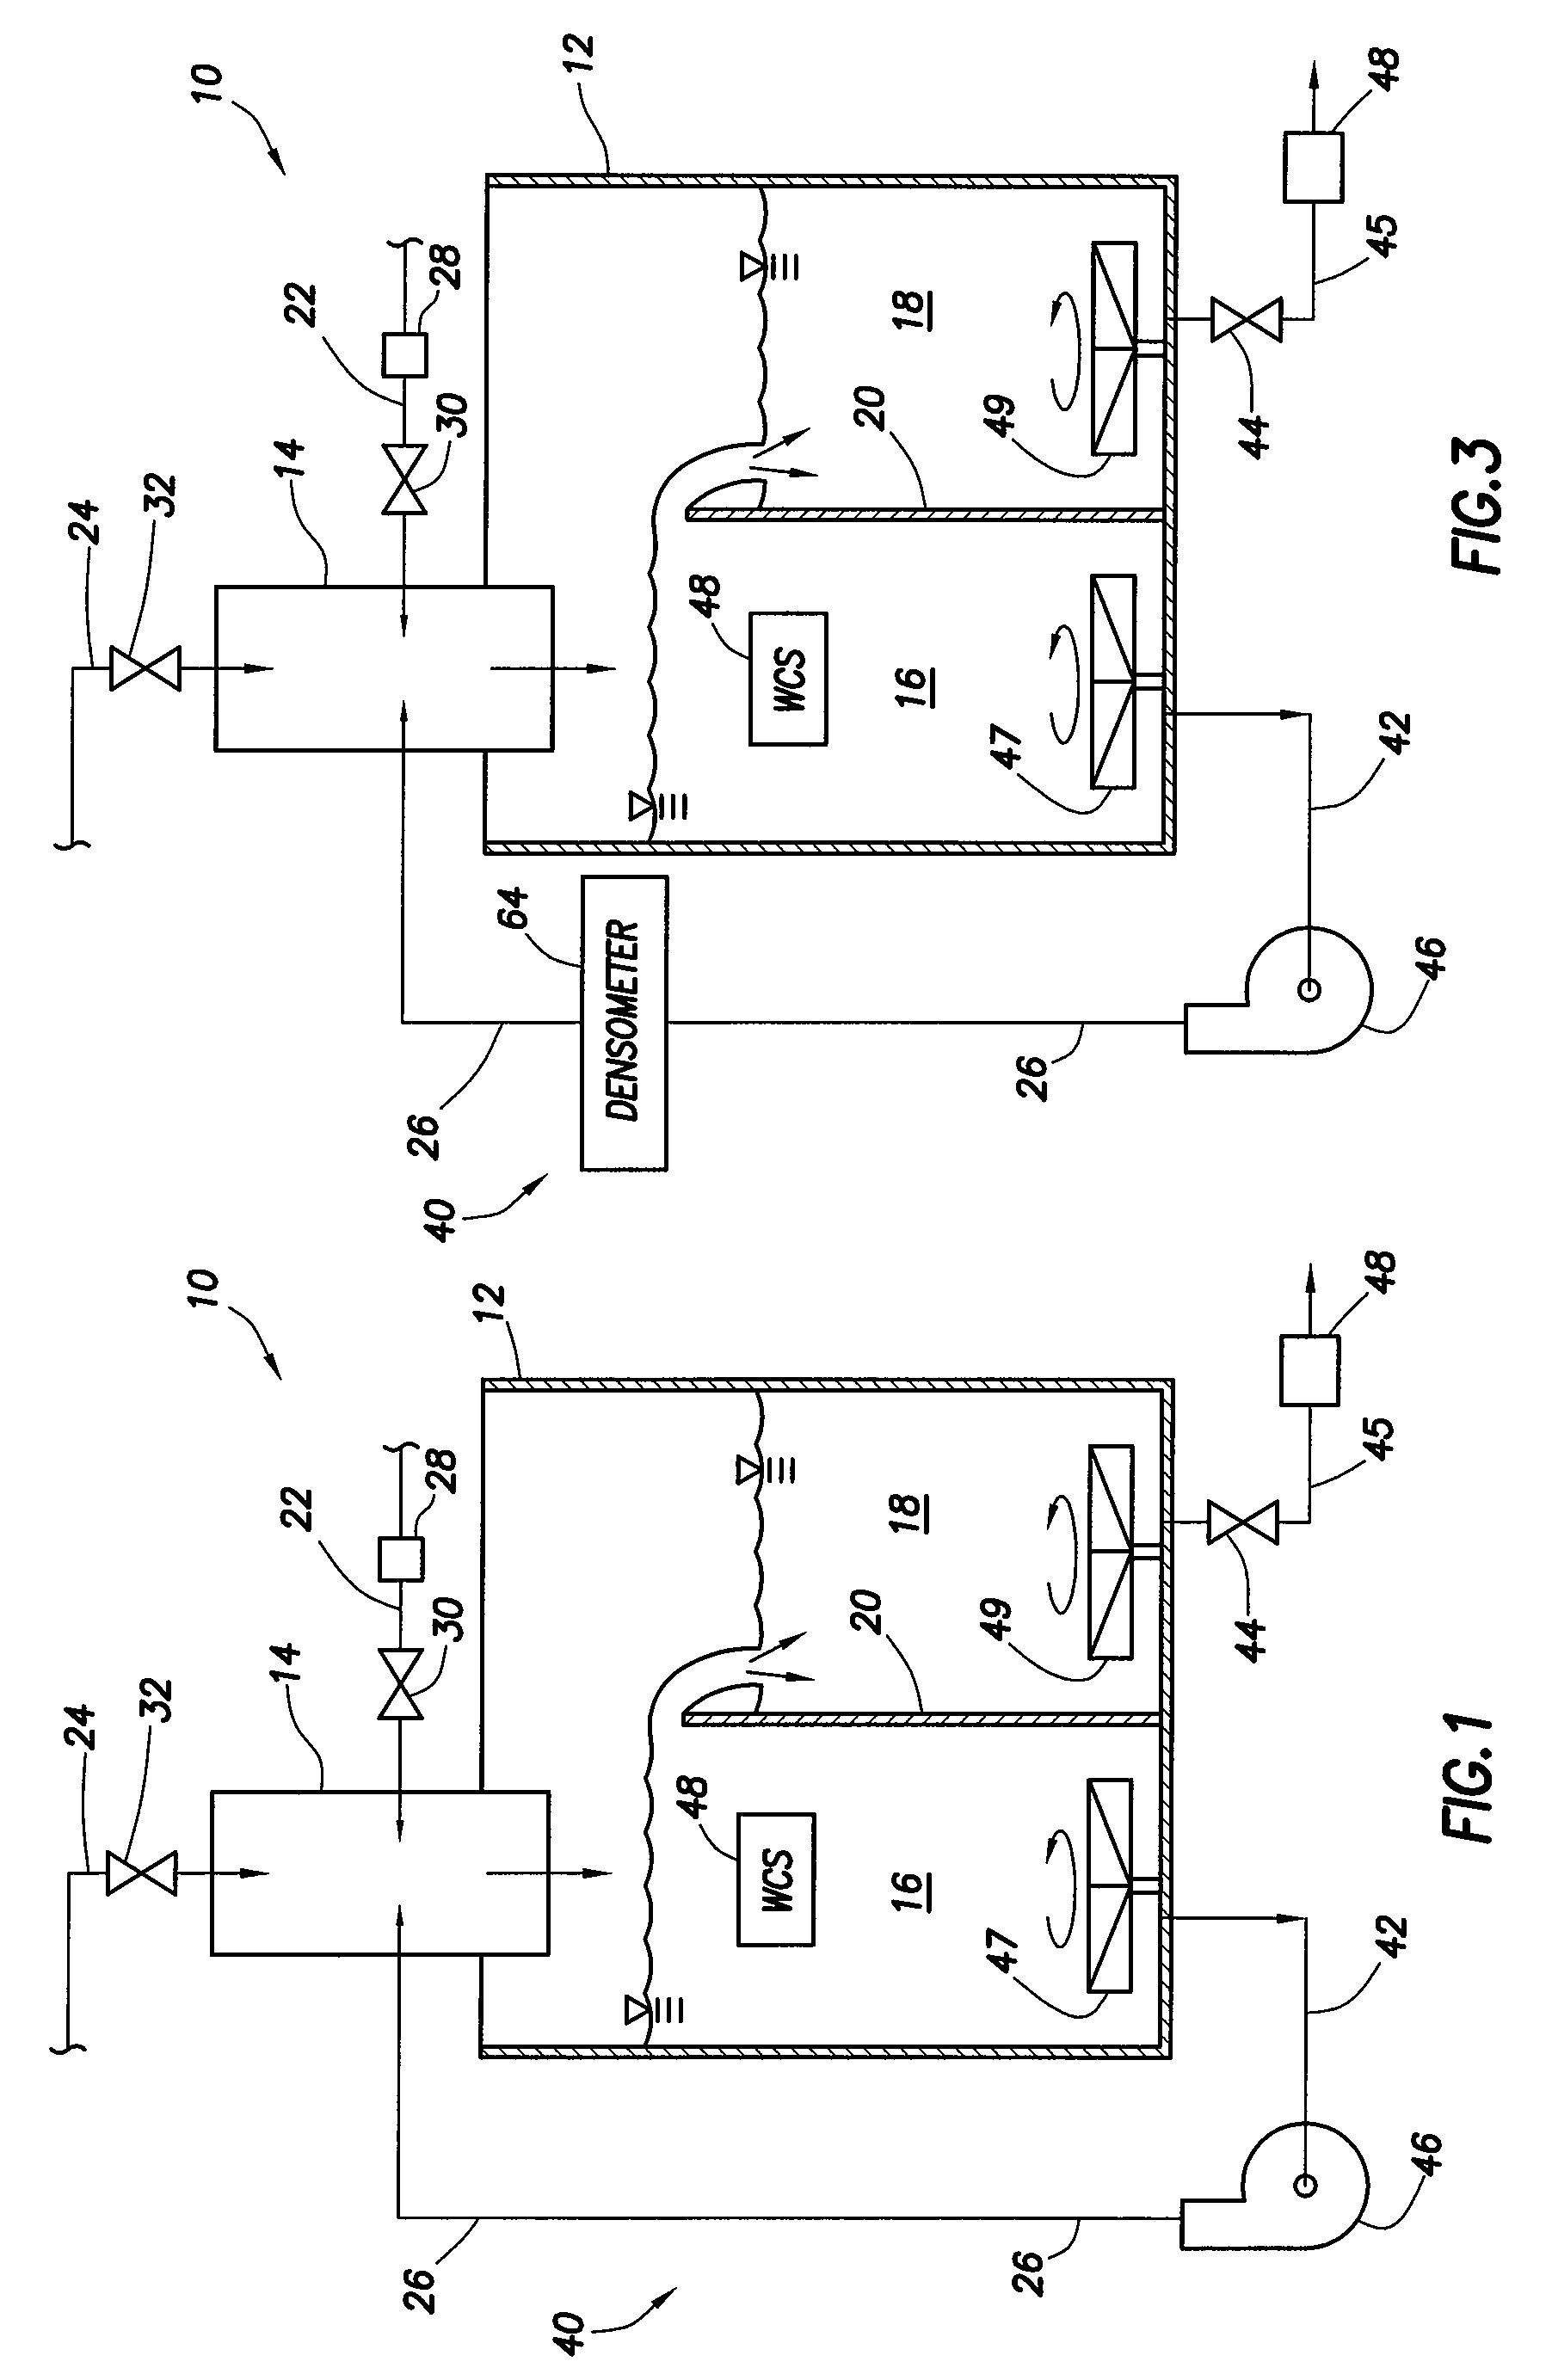 System and method for mixing water and non-aqueous materials using measured water concentration to control addition of ingredients